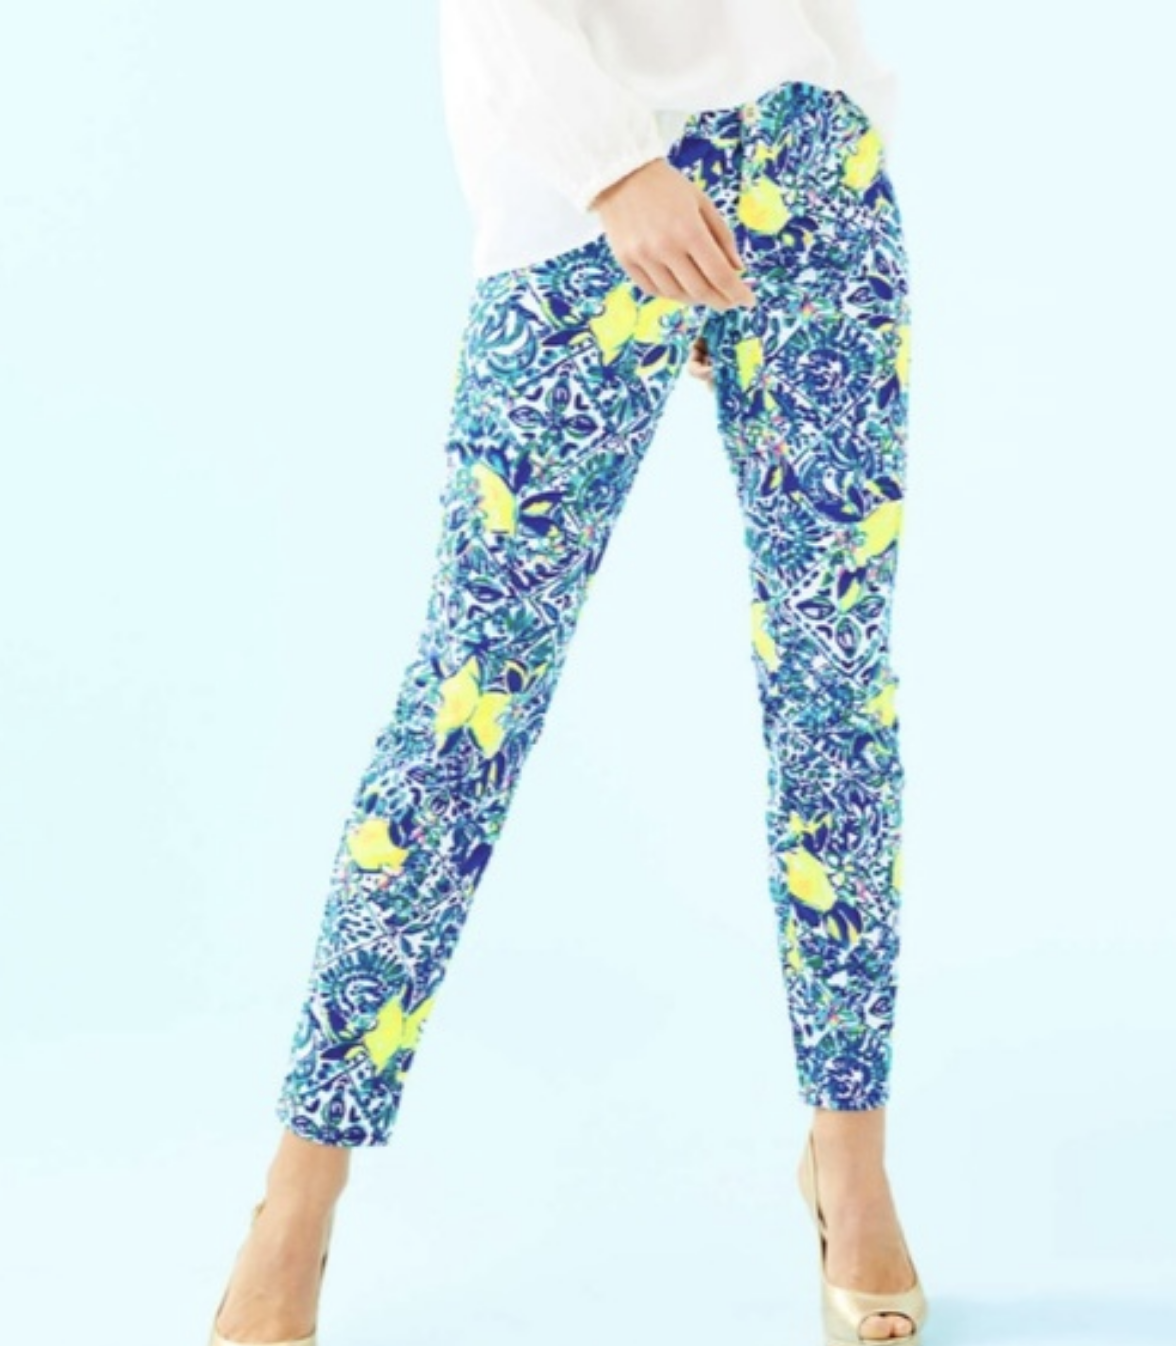 Lilly Pulitzer KELLY Skinny Ankle Pants Resort Zest for Life - Size 8